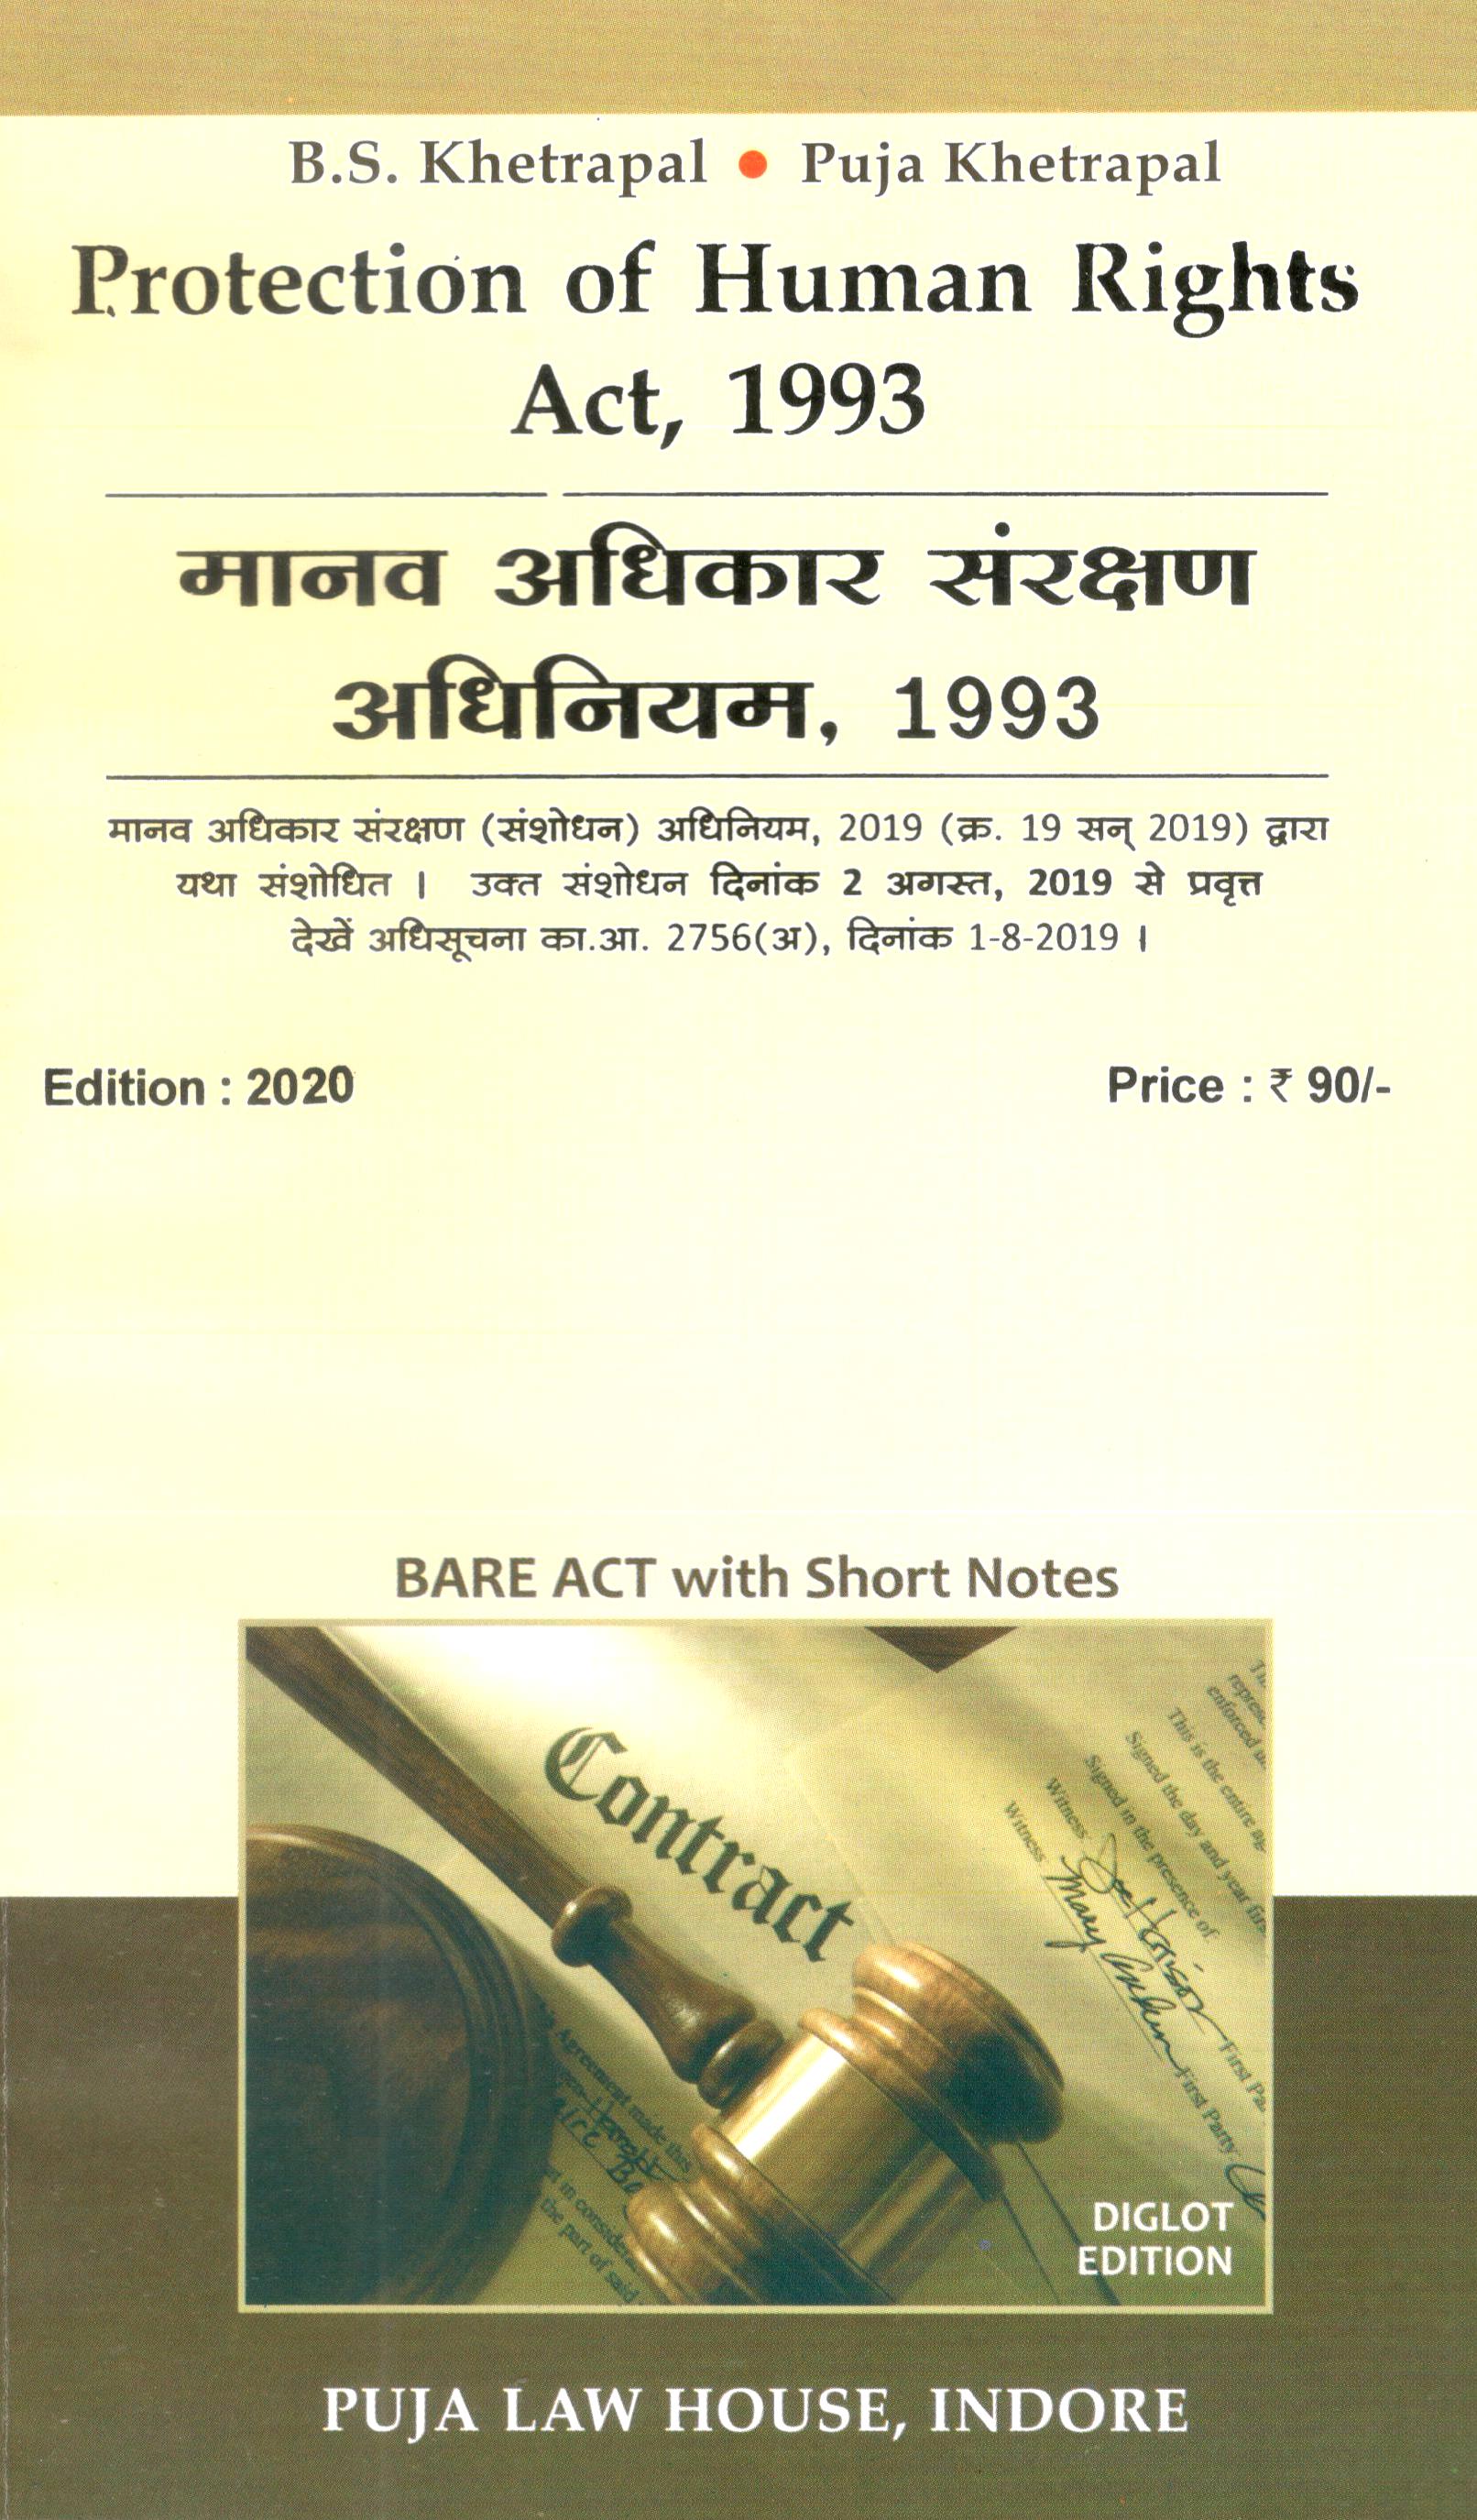  Buy मानव अधिकार संरक्षण अधिनियम, 1993 / Protection of Human Rights Act, 1993 